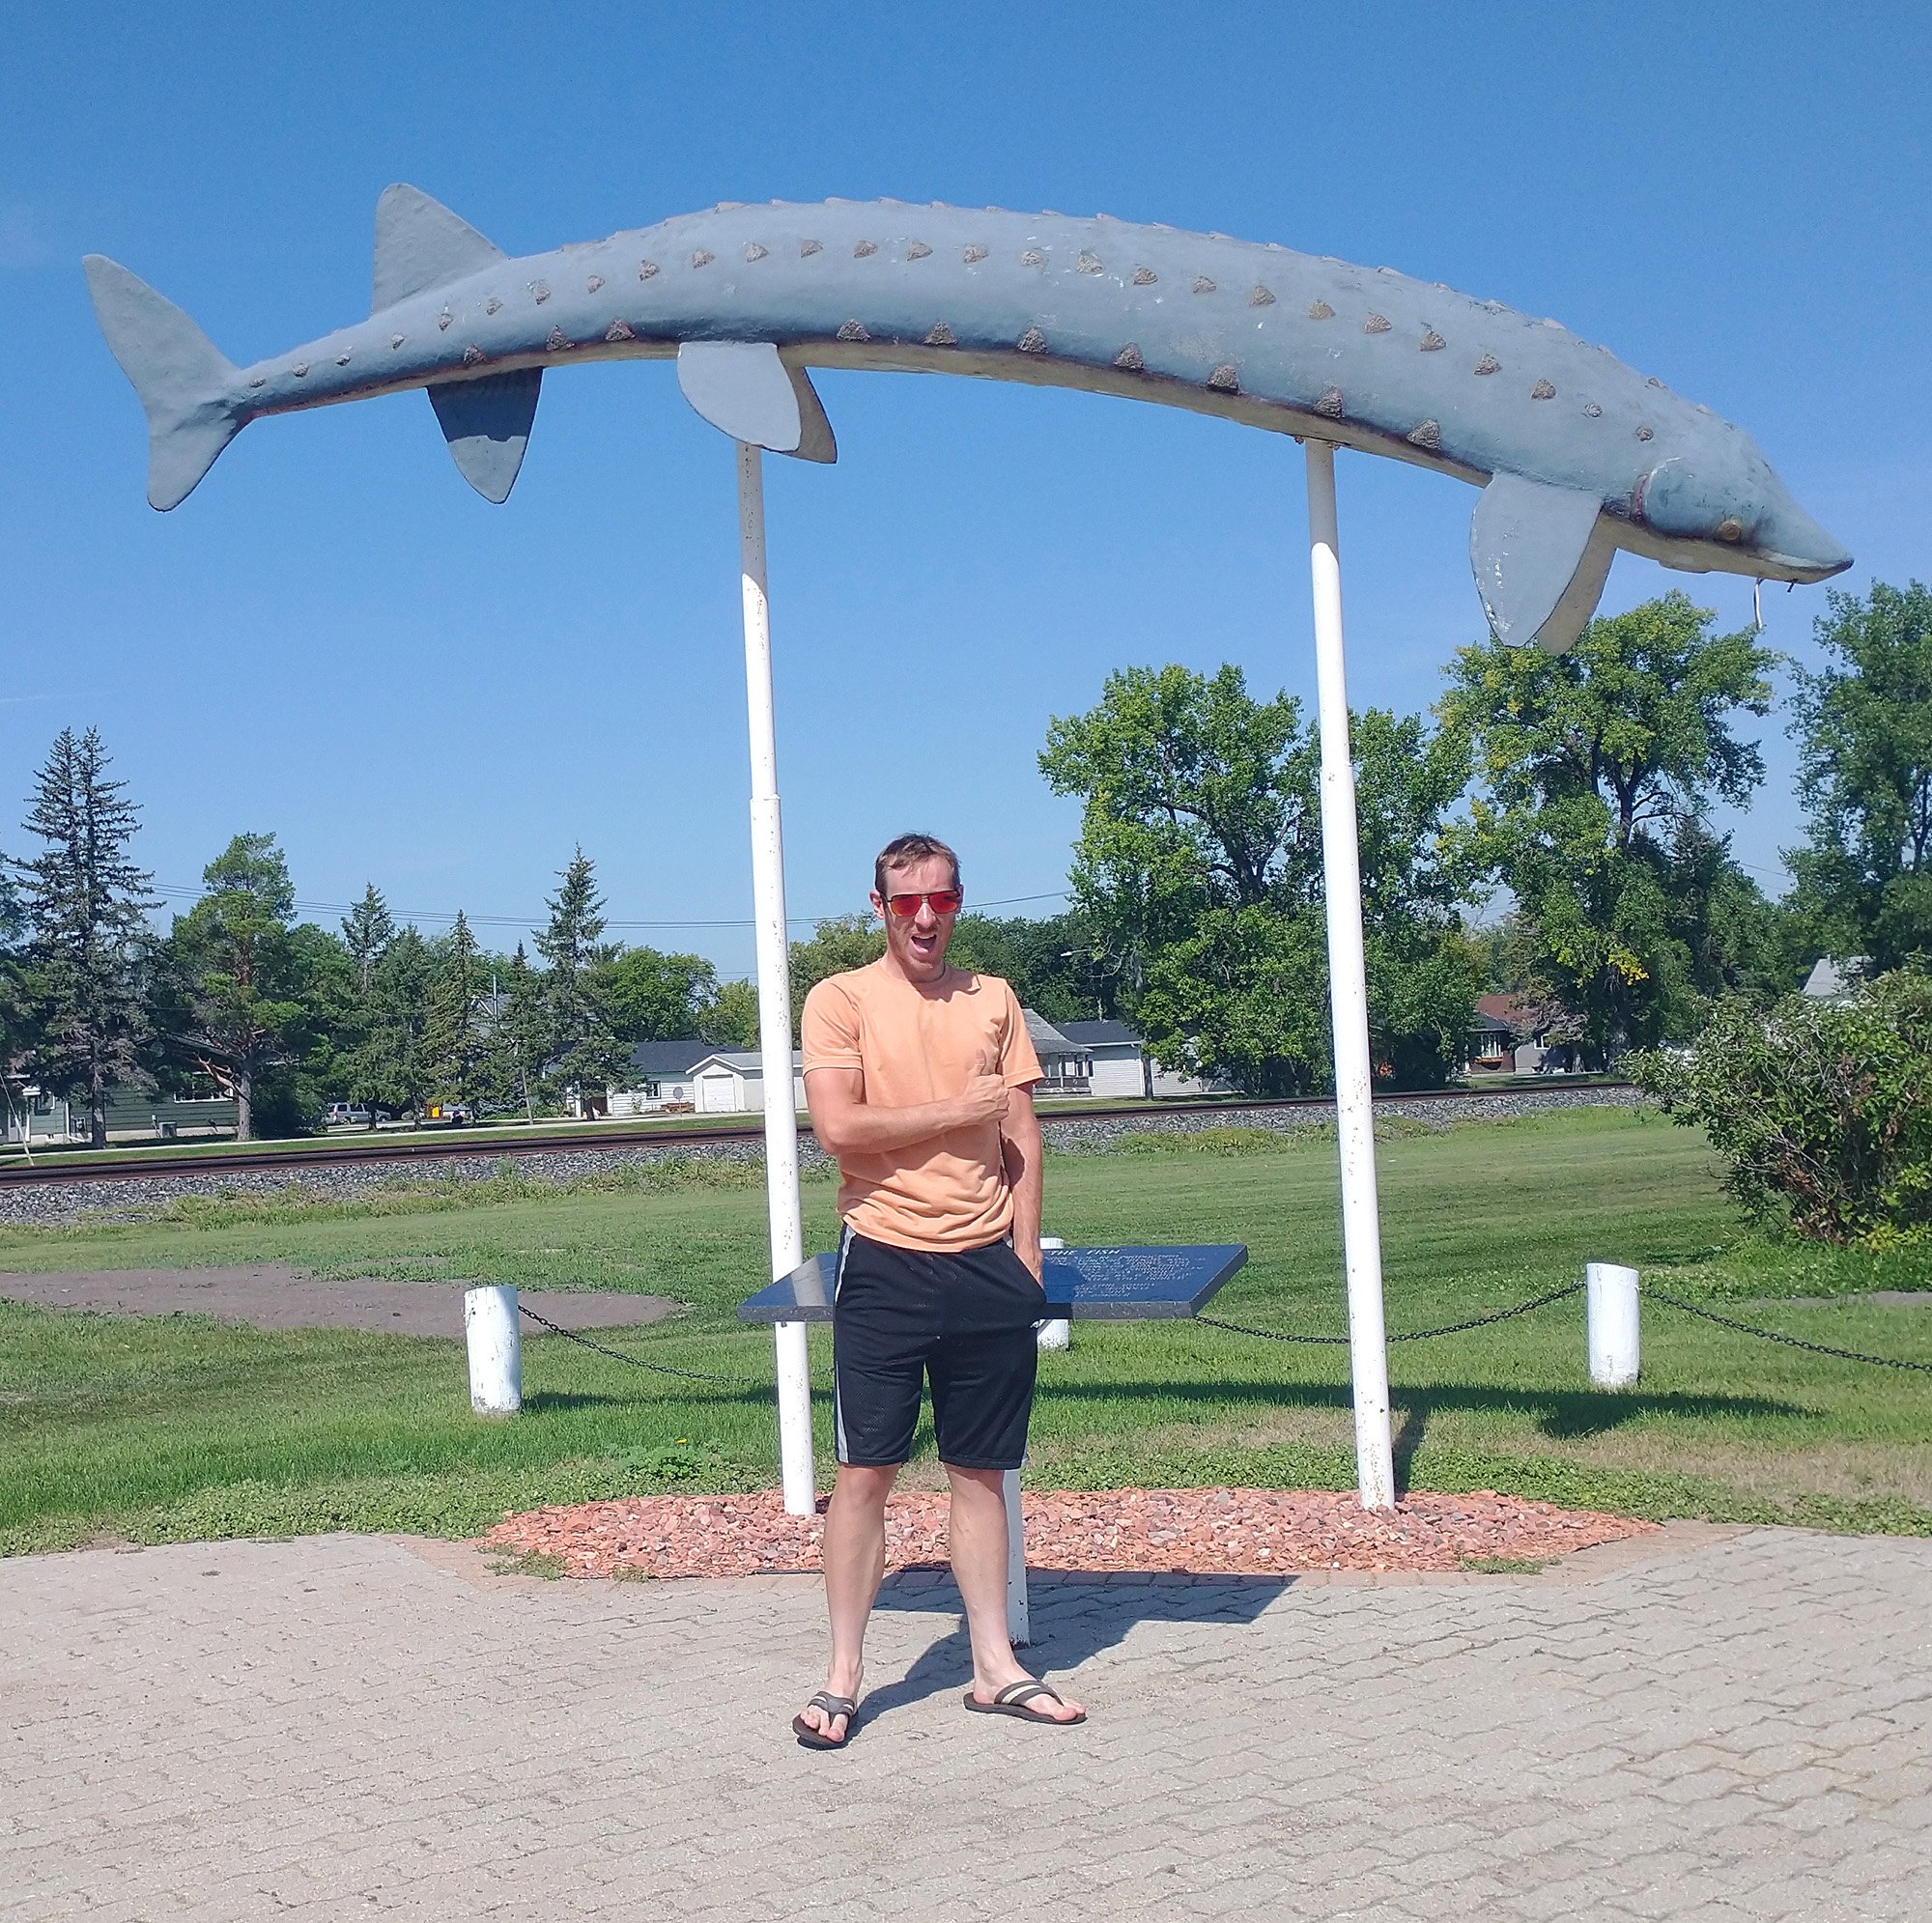 First stop: Dominion City, home of the largest Sturgeon.